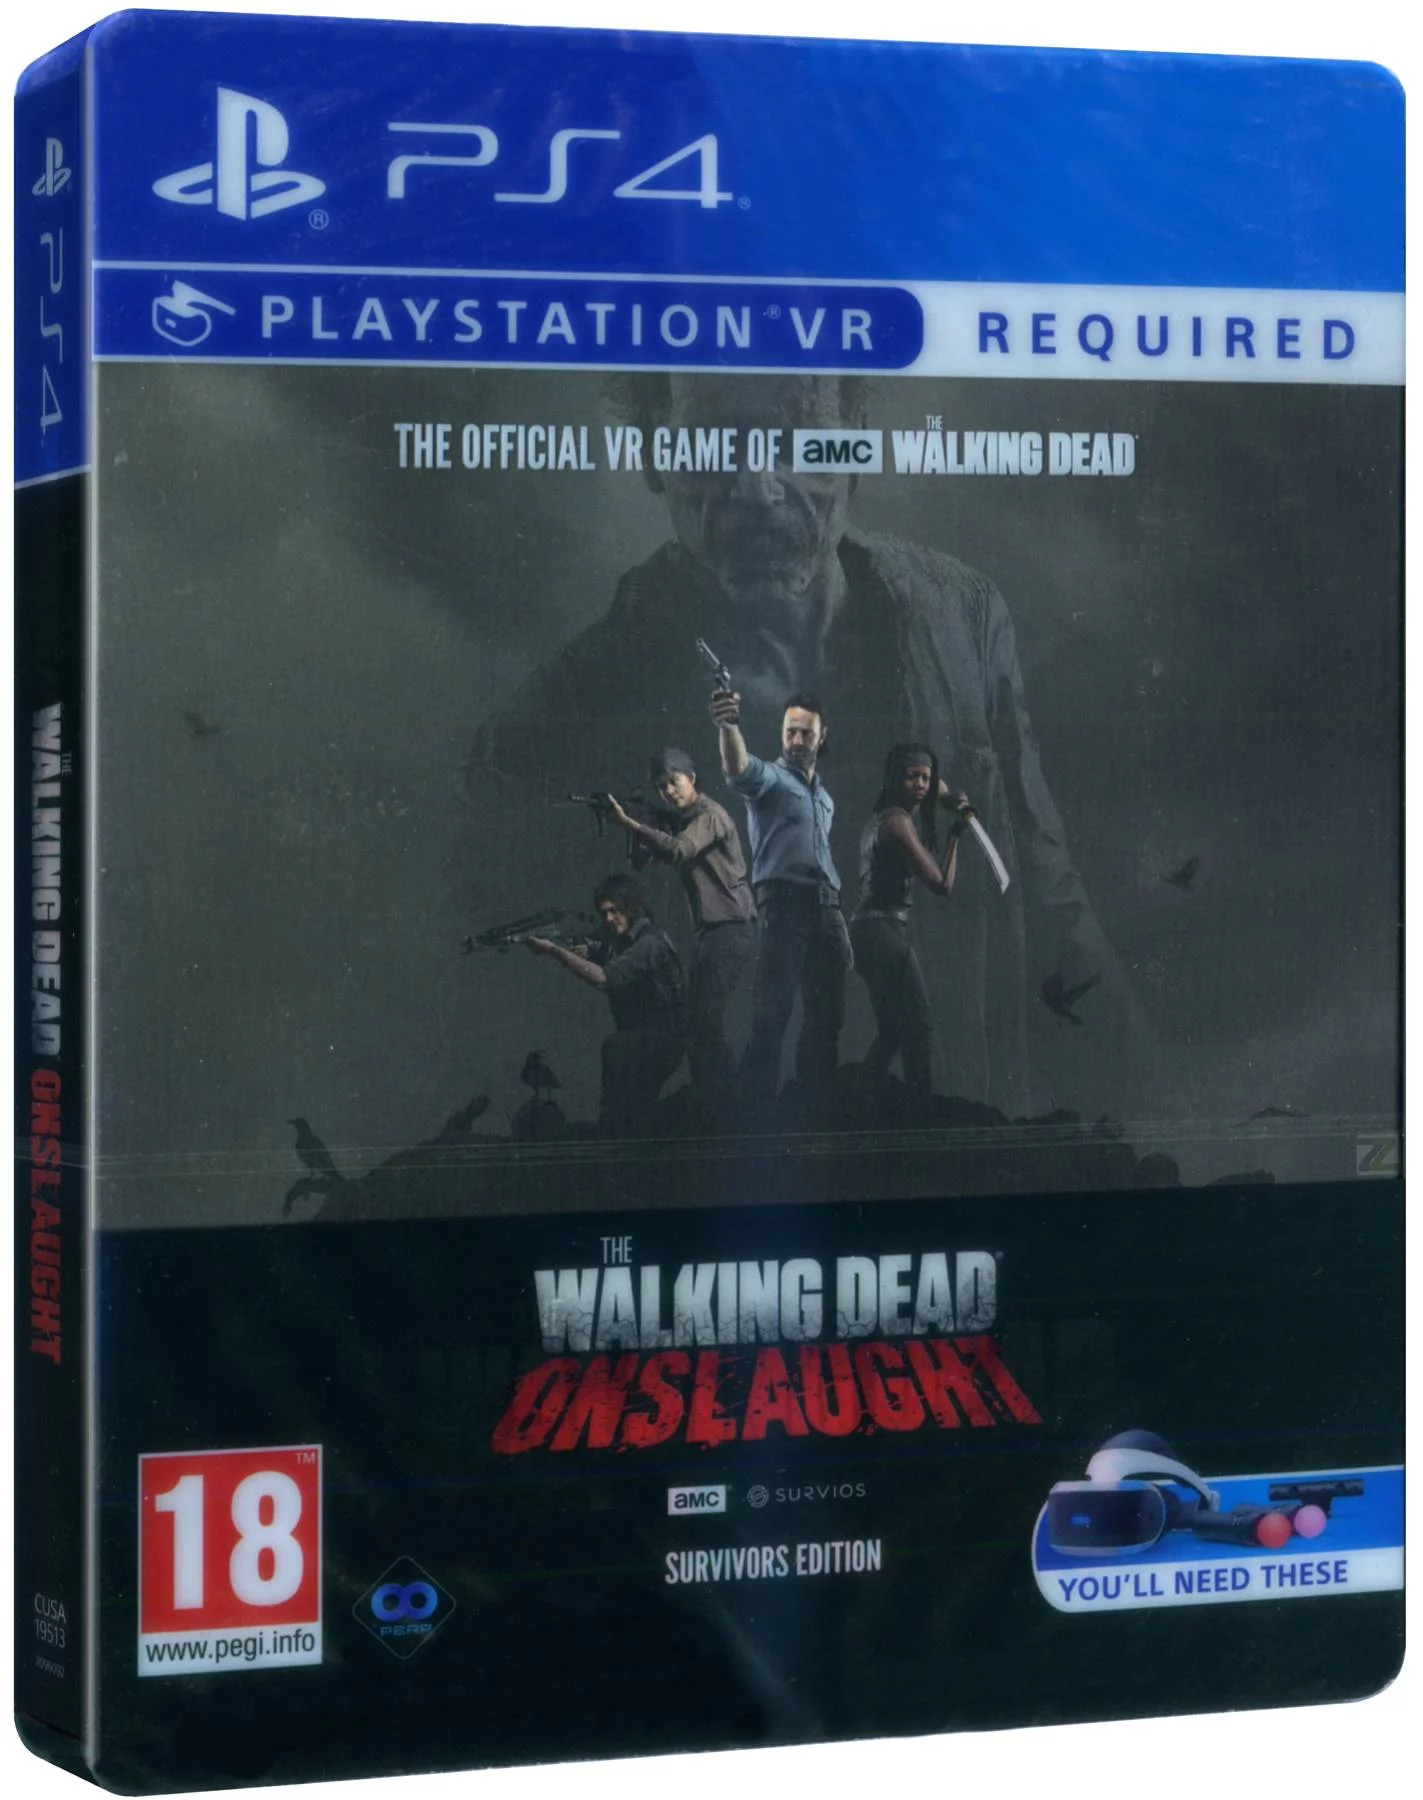 The Walking Dead Onslaught Steelbook Edition